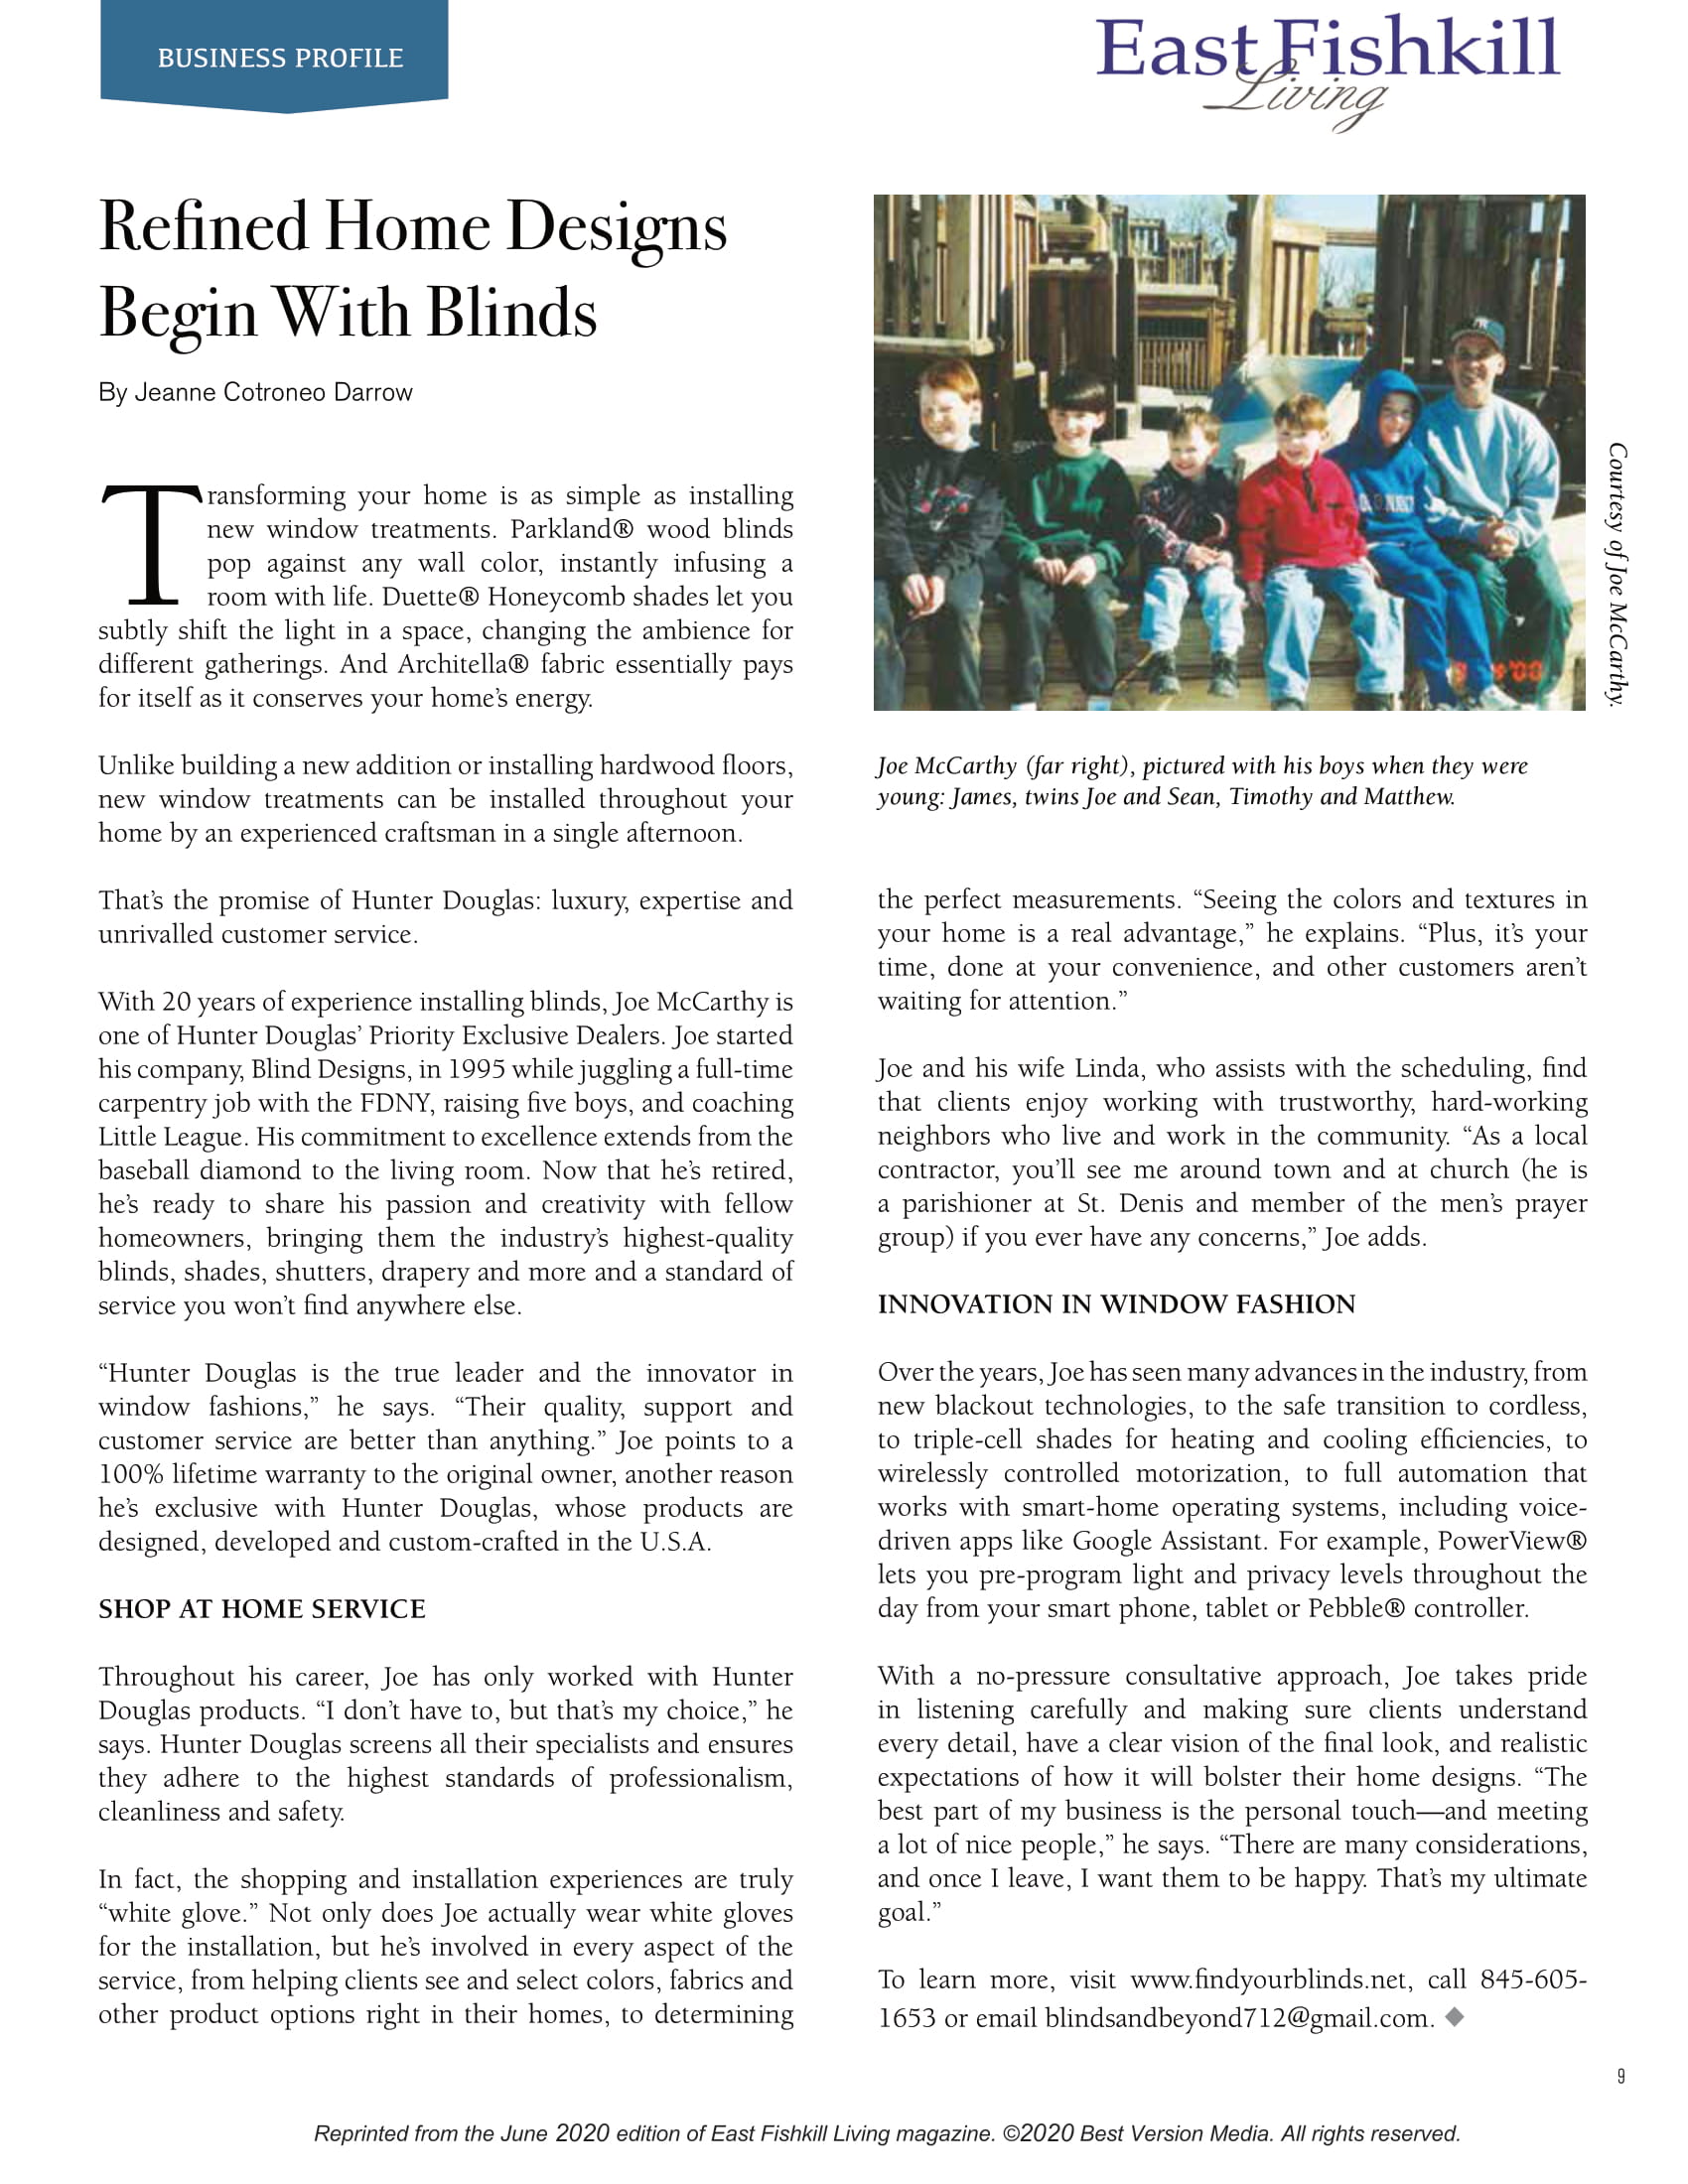 Blind Designs Business Profile Article — Dutchess County, NY — Blind Designs